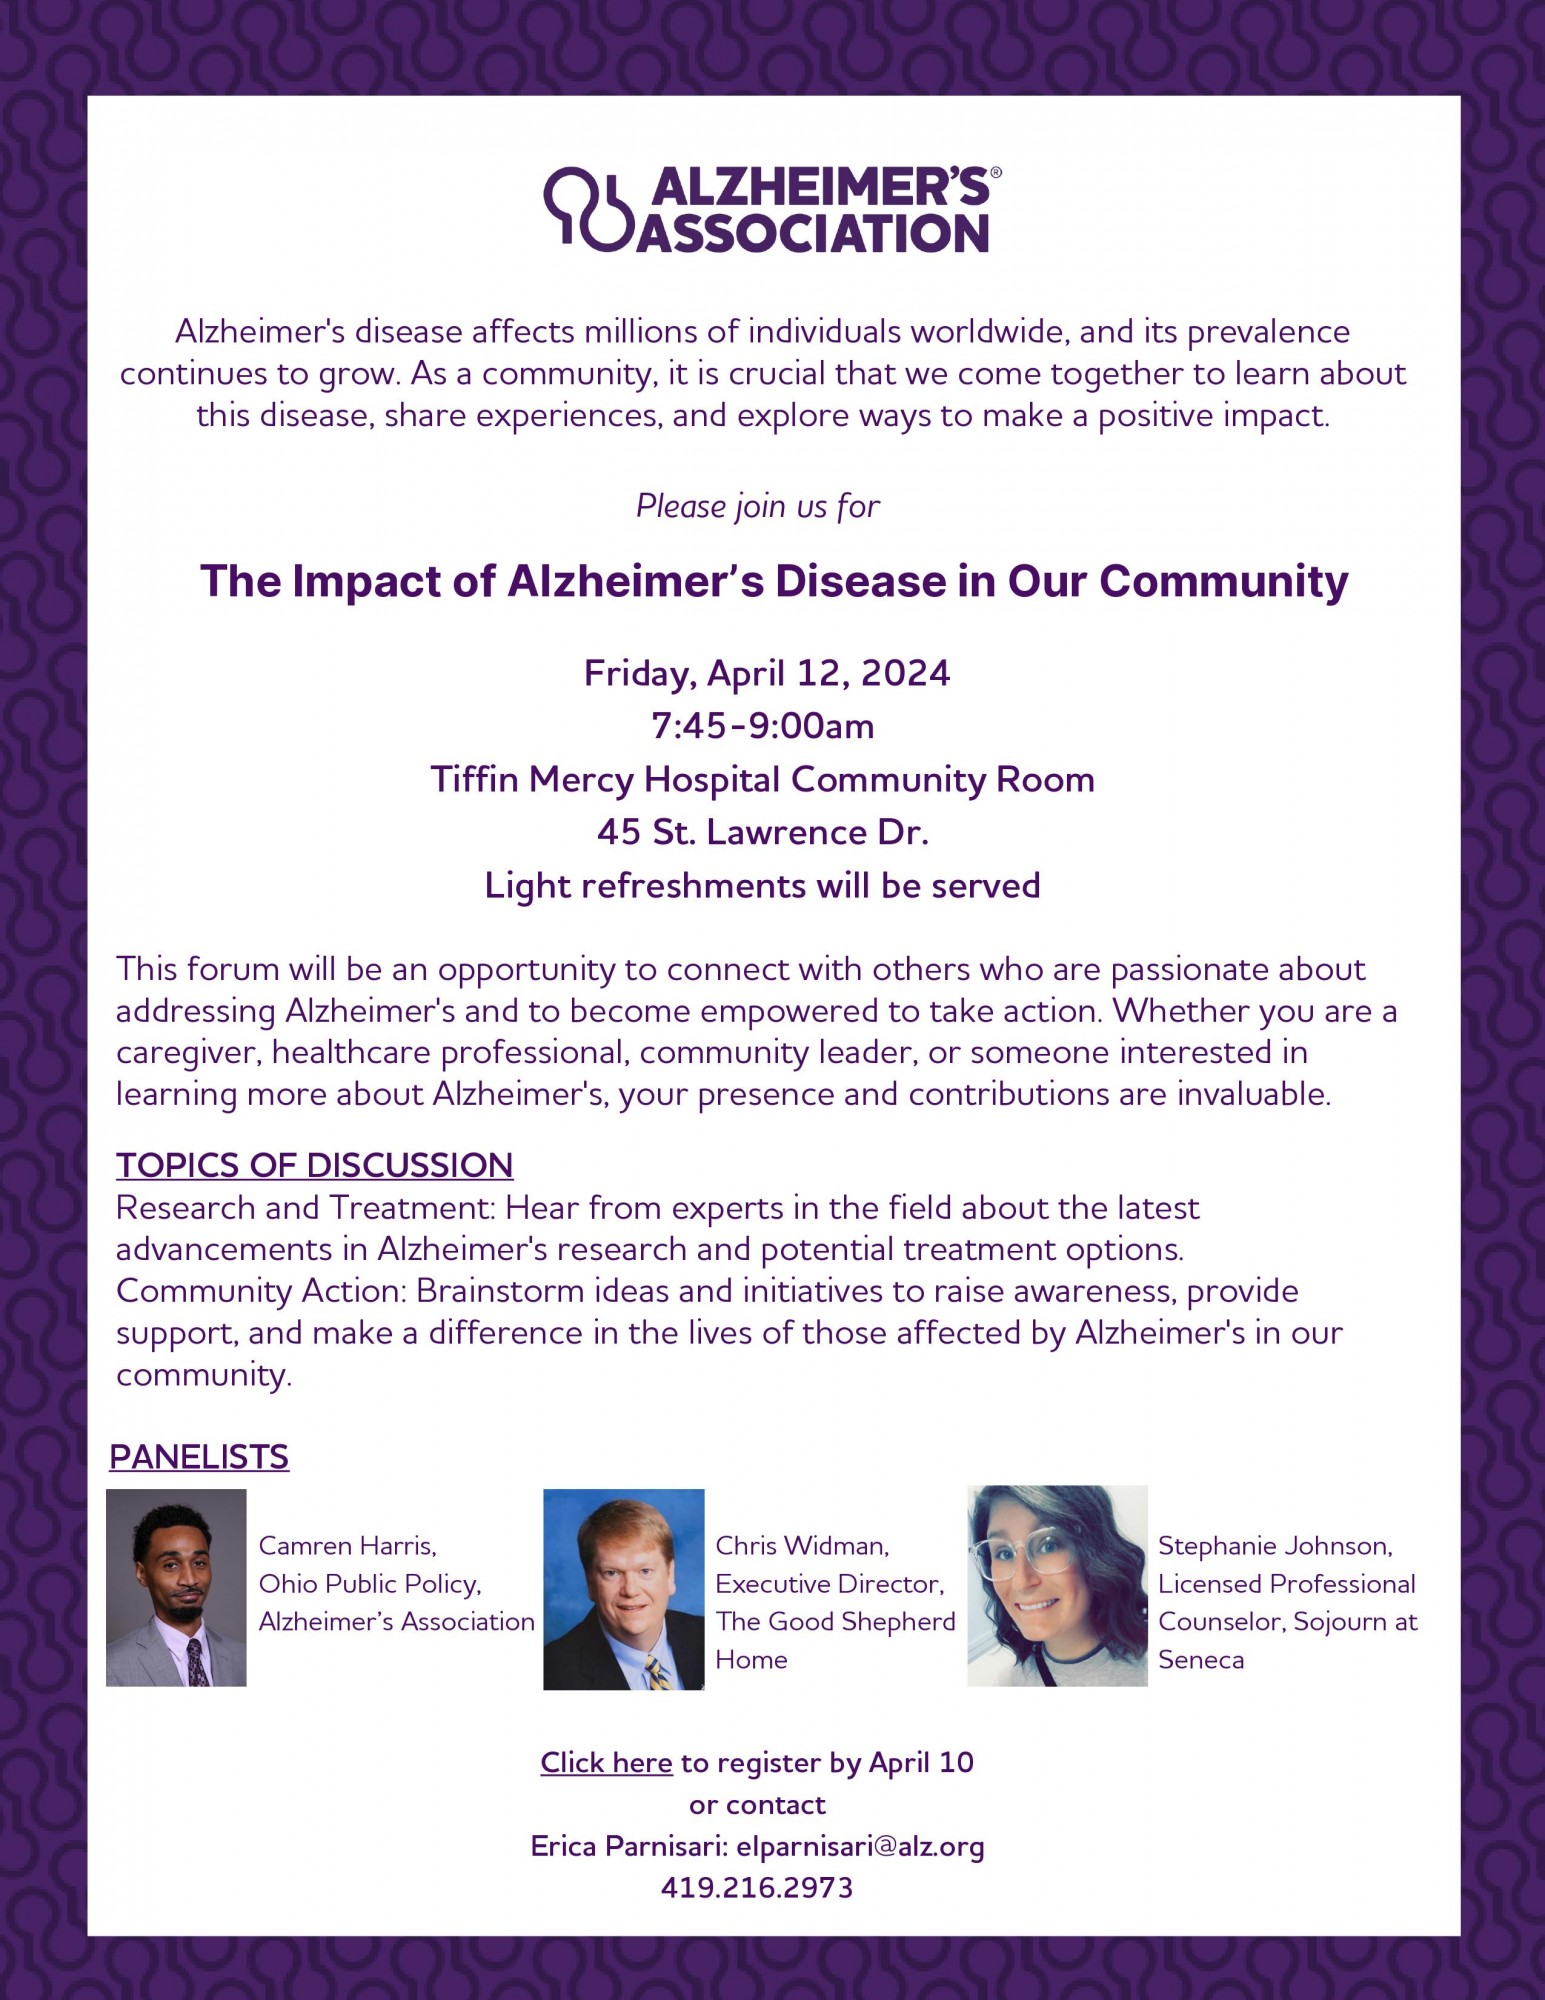 The Impact of Alzheimer’s Disease in Our Community